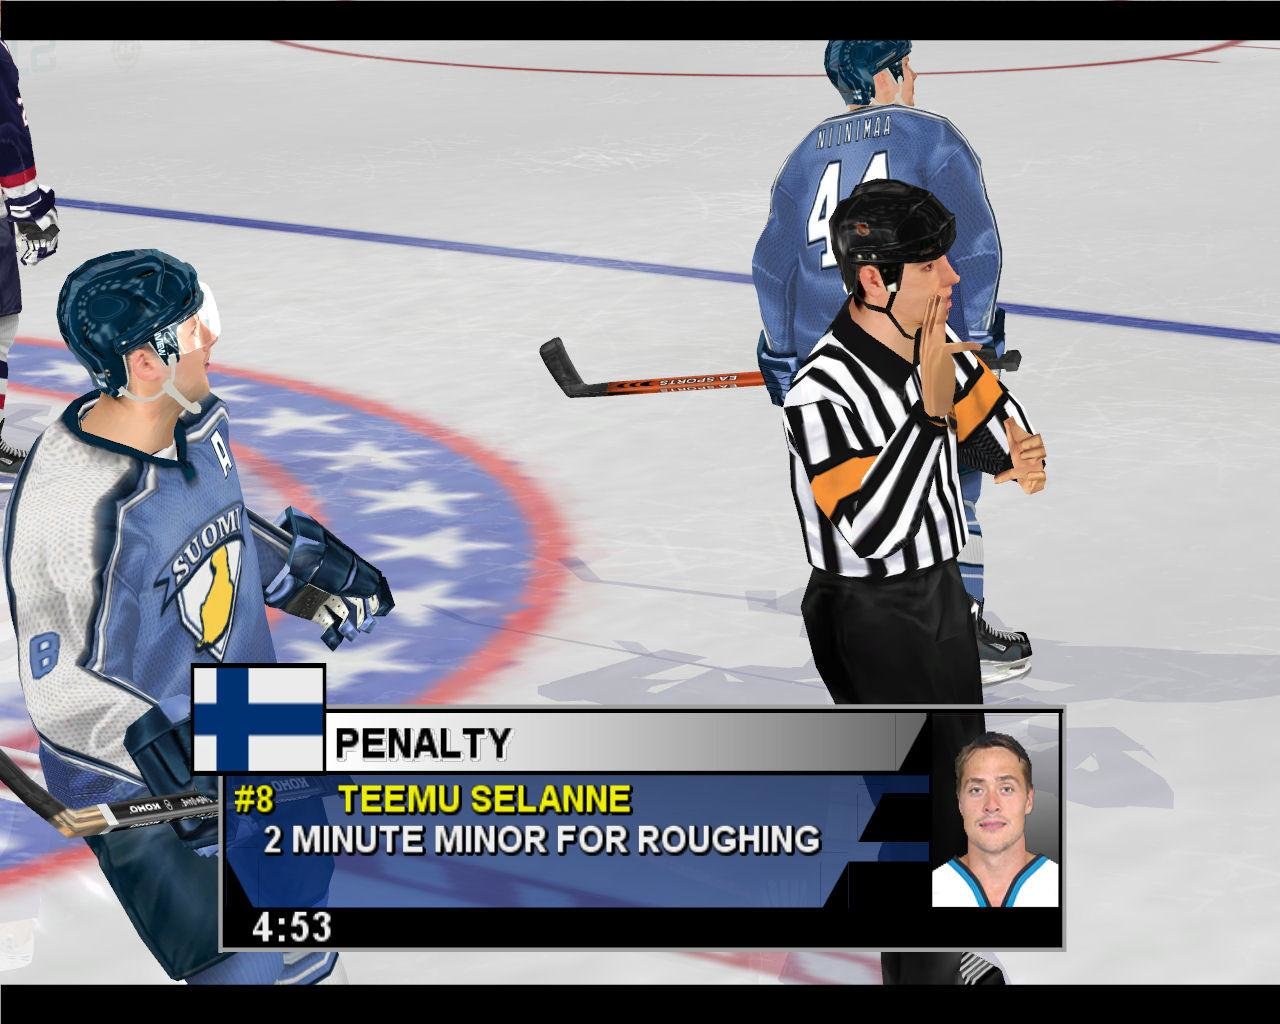 NHL 2004 - PC Review and Full Download | Old PC Gaming1280 x 1024